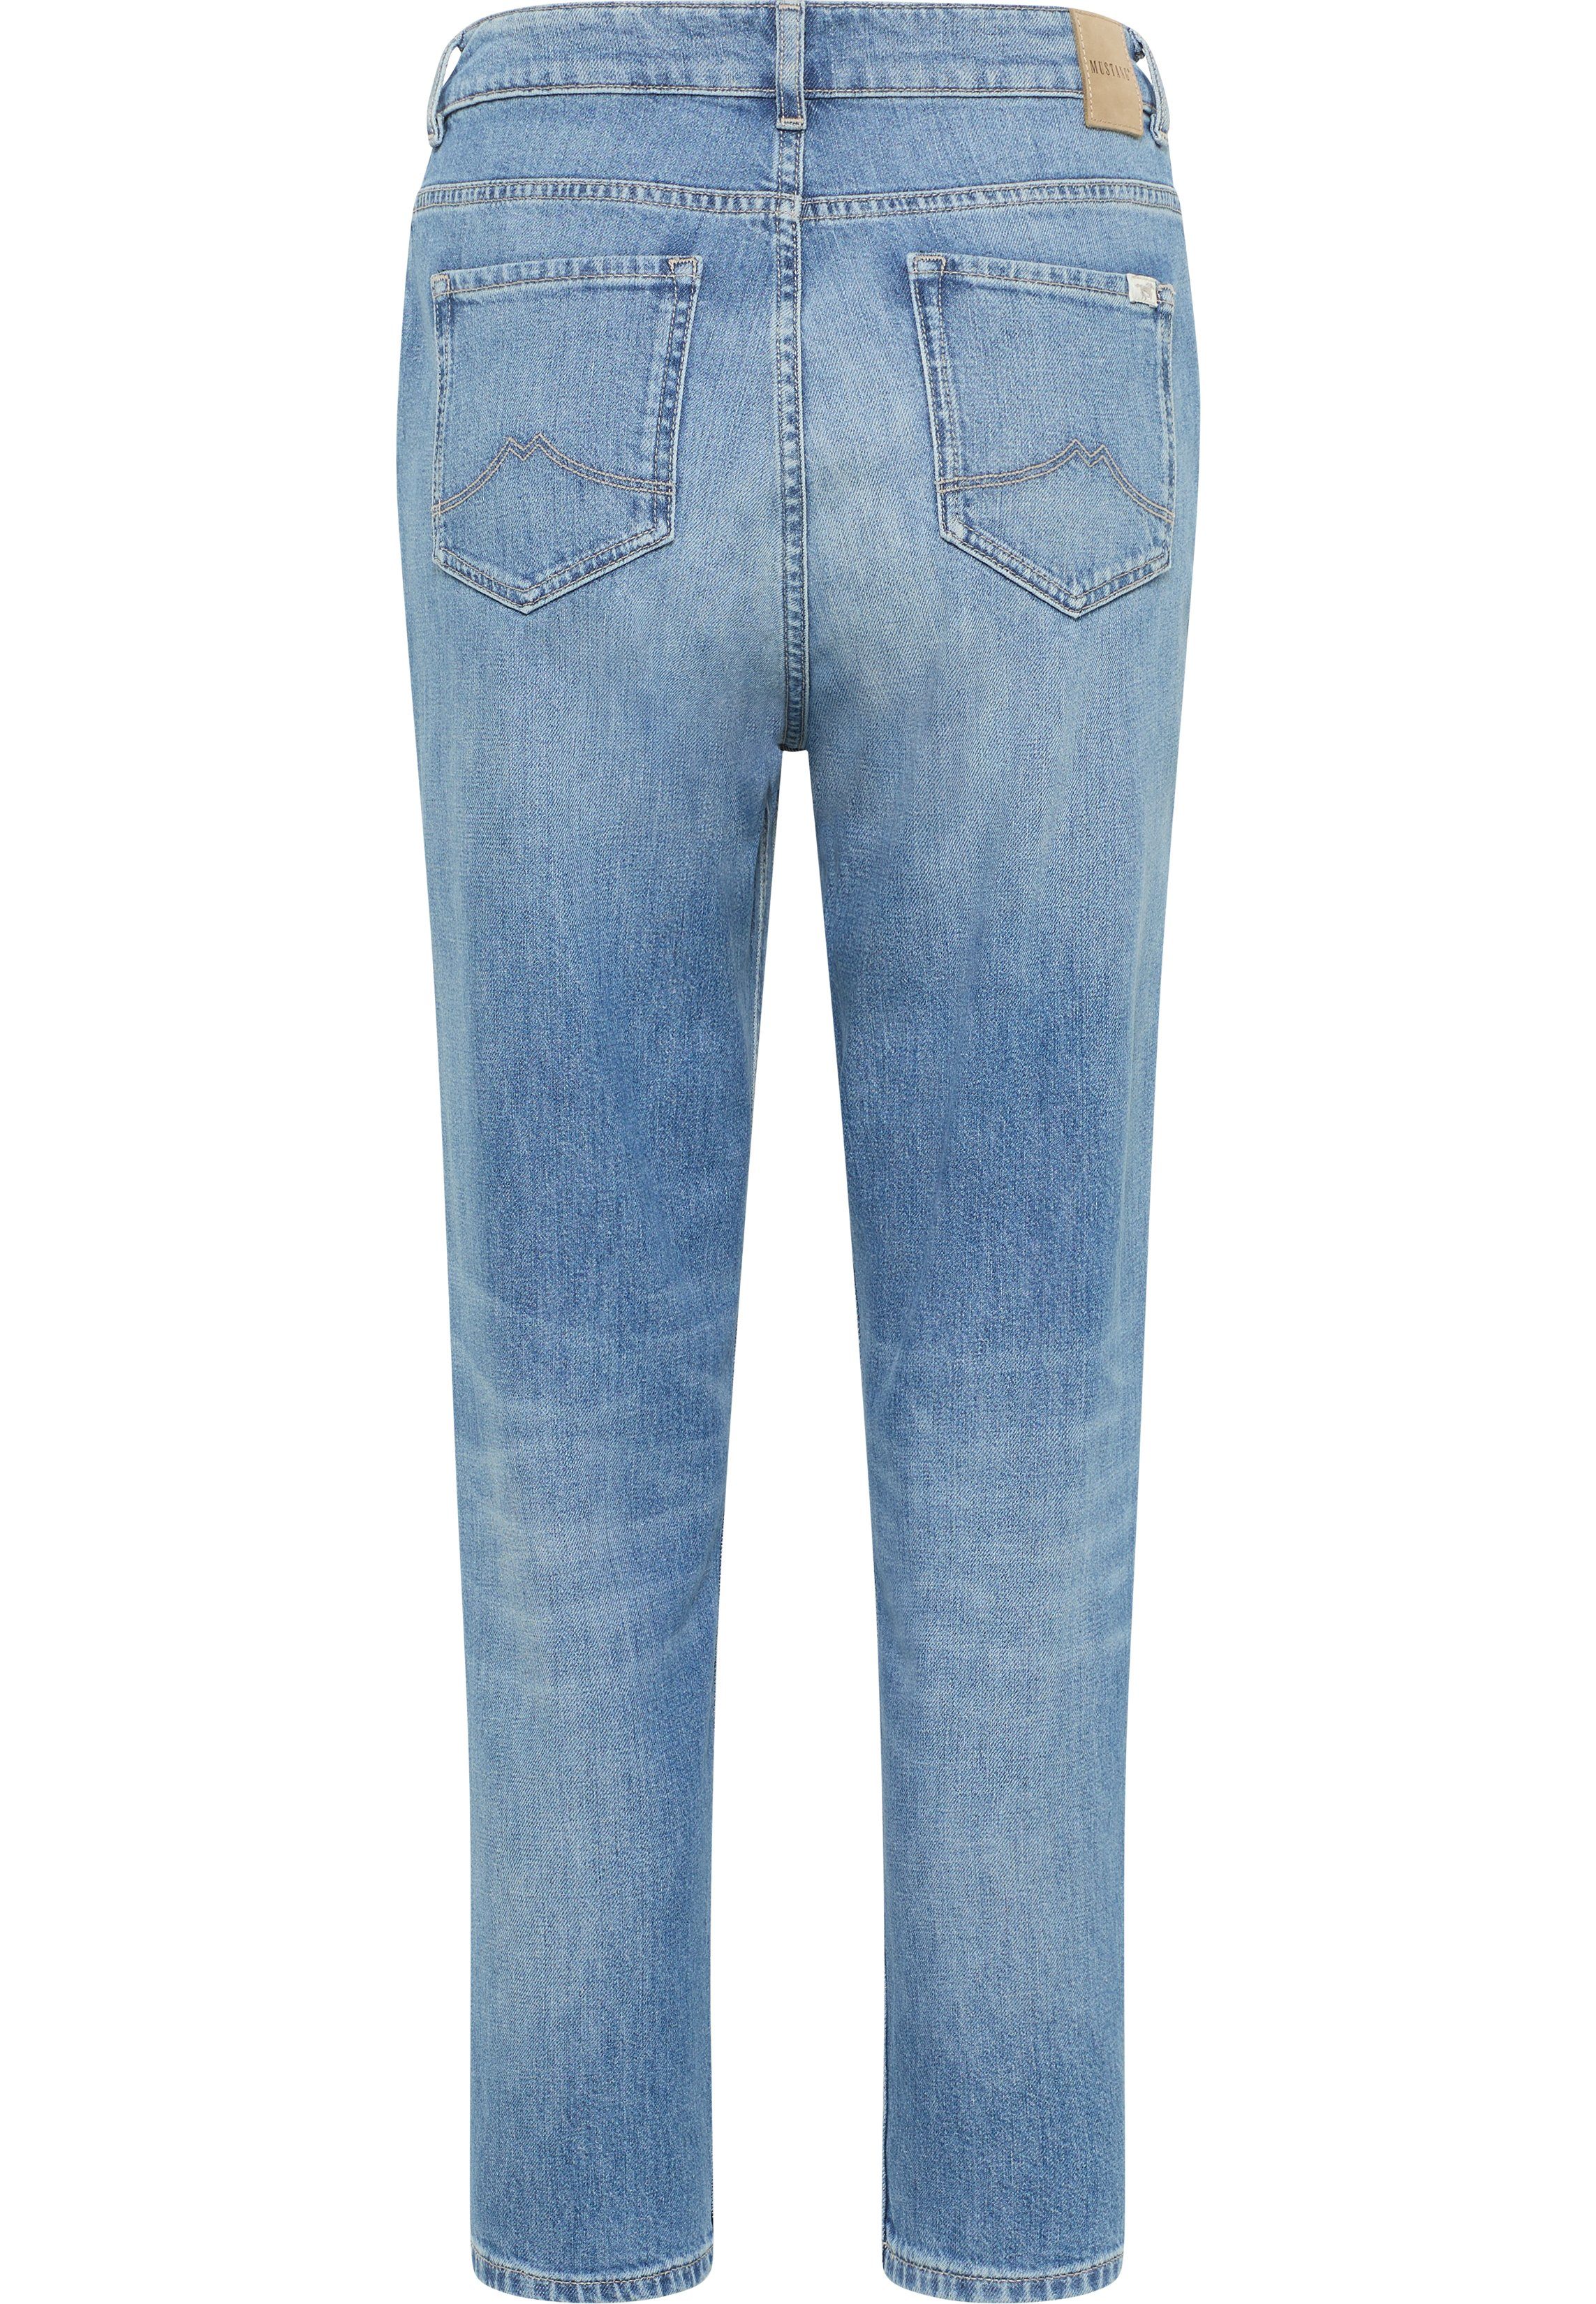 Charlotte Tapered Tapered-fit-Jeans MUSTANG hellblau-5000403 Style